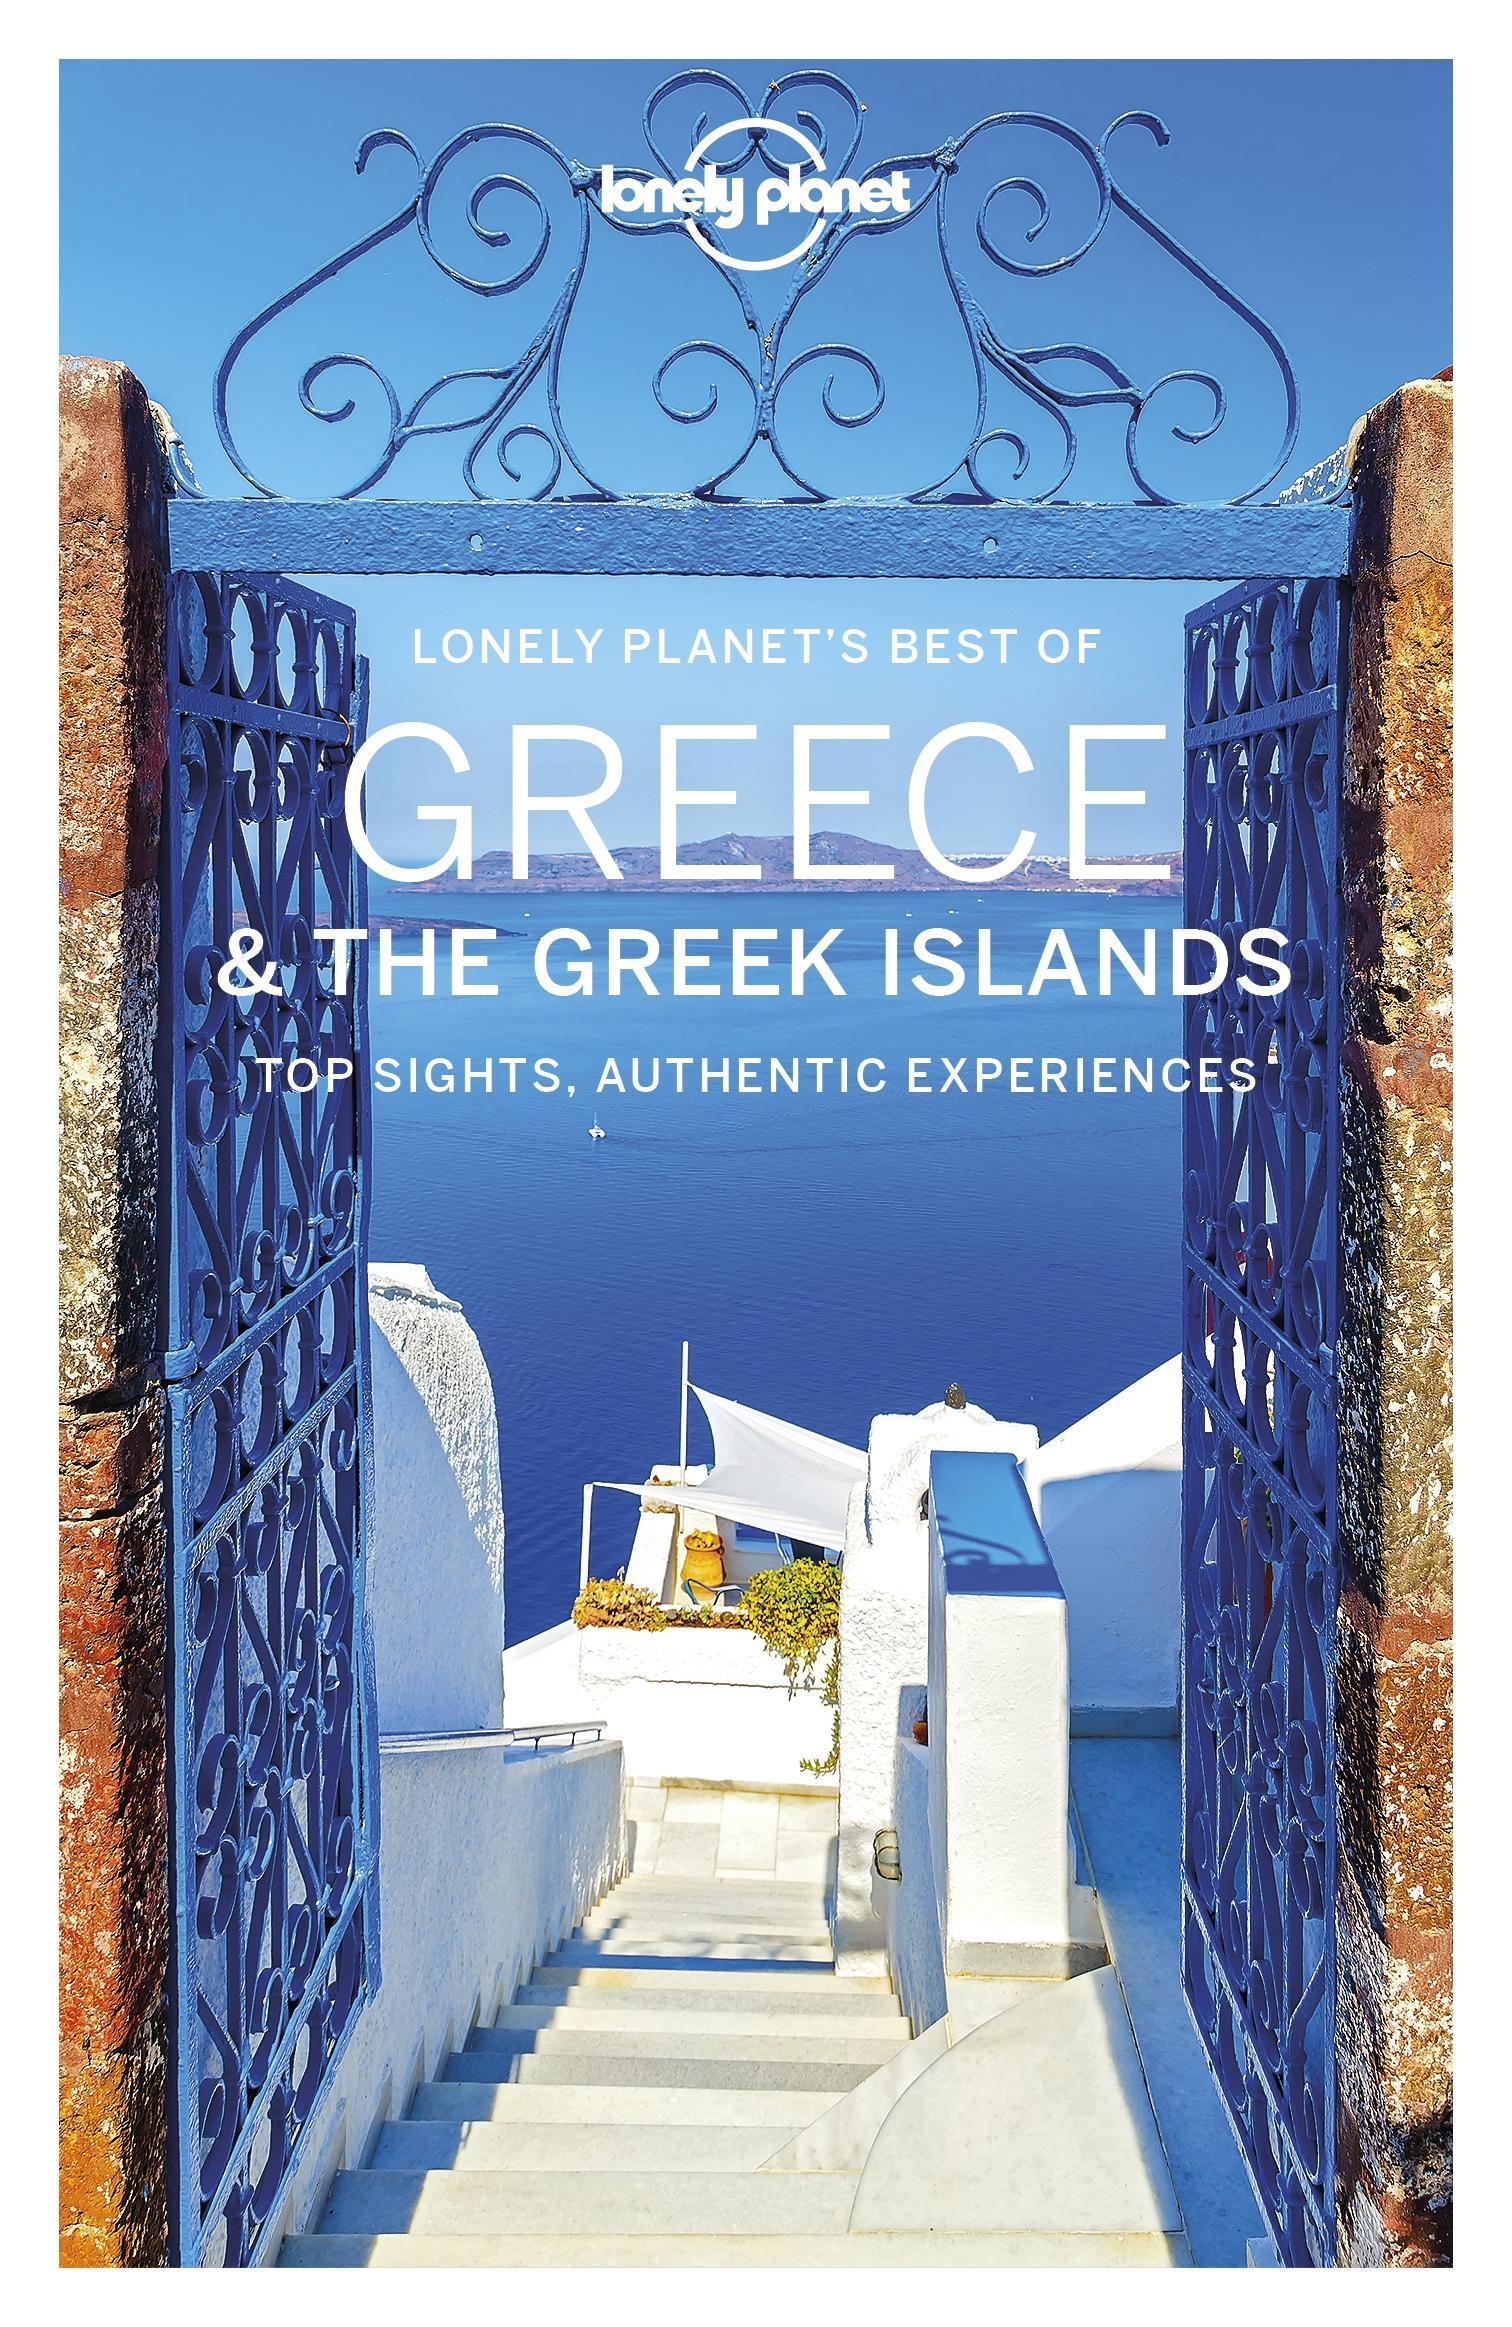 Lonely　v.　the　Greek　Best　Planet　Lonely　Travel　Planet　Greece　eBook　Lonely　Weltbild　Islands　of　Planet　Guide